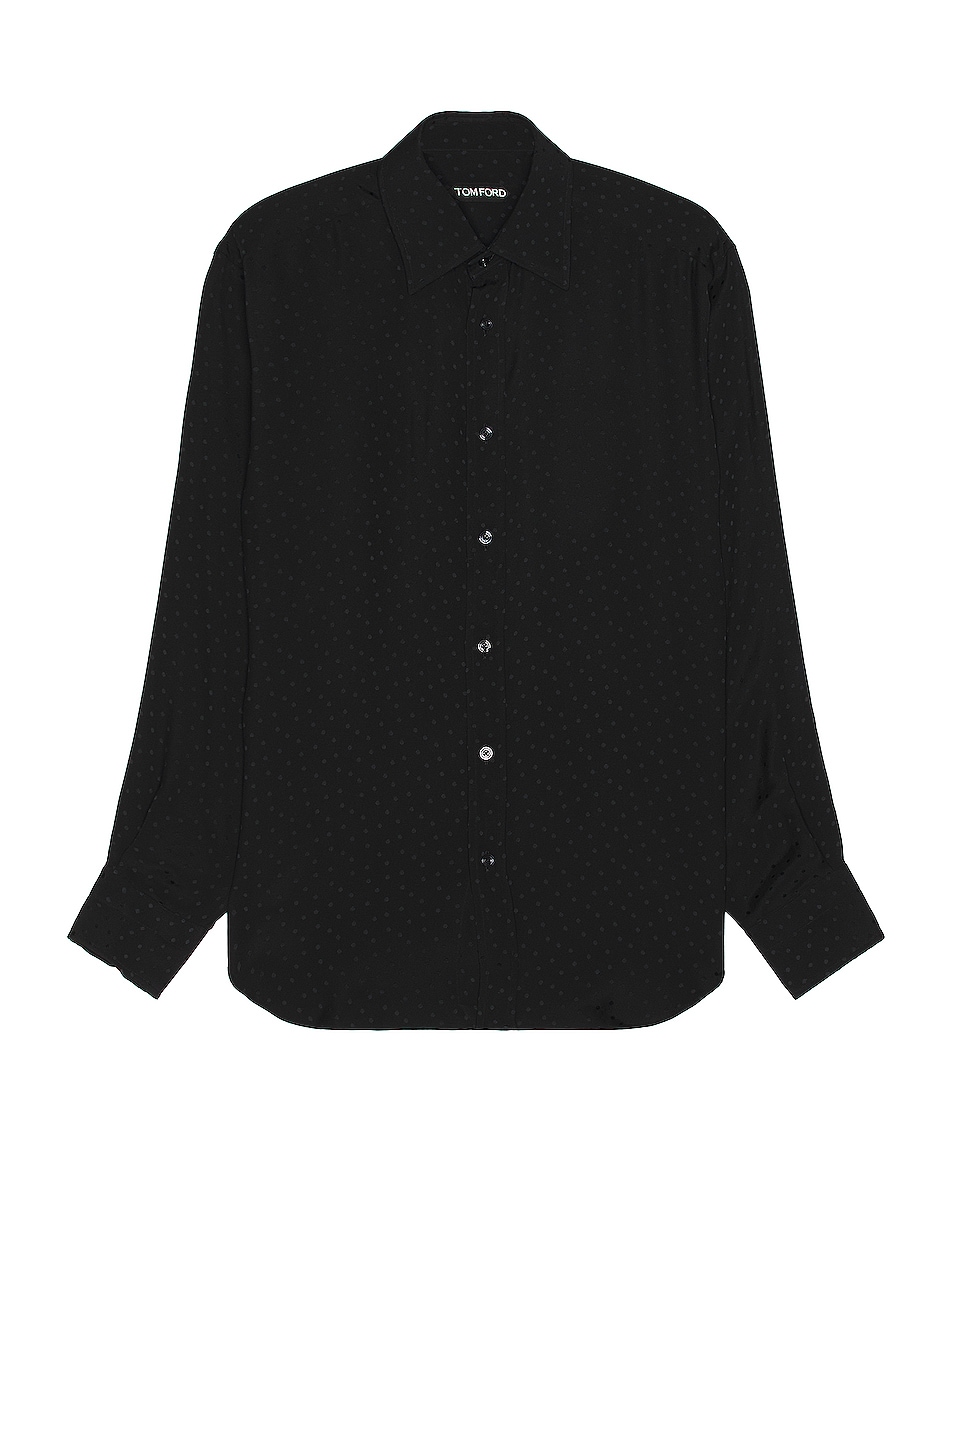 Image 1 of TOM FORD Long Sleeve Dress Shirt in Black